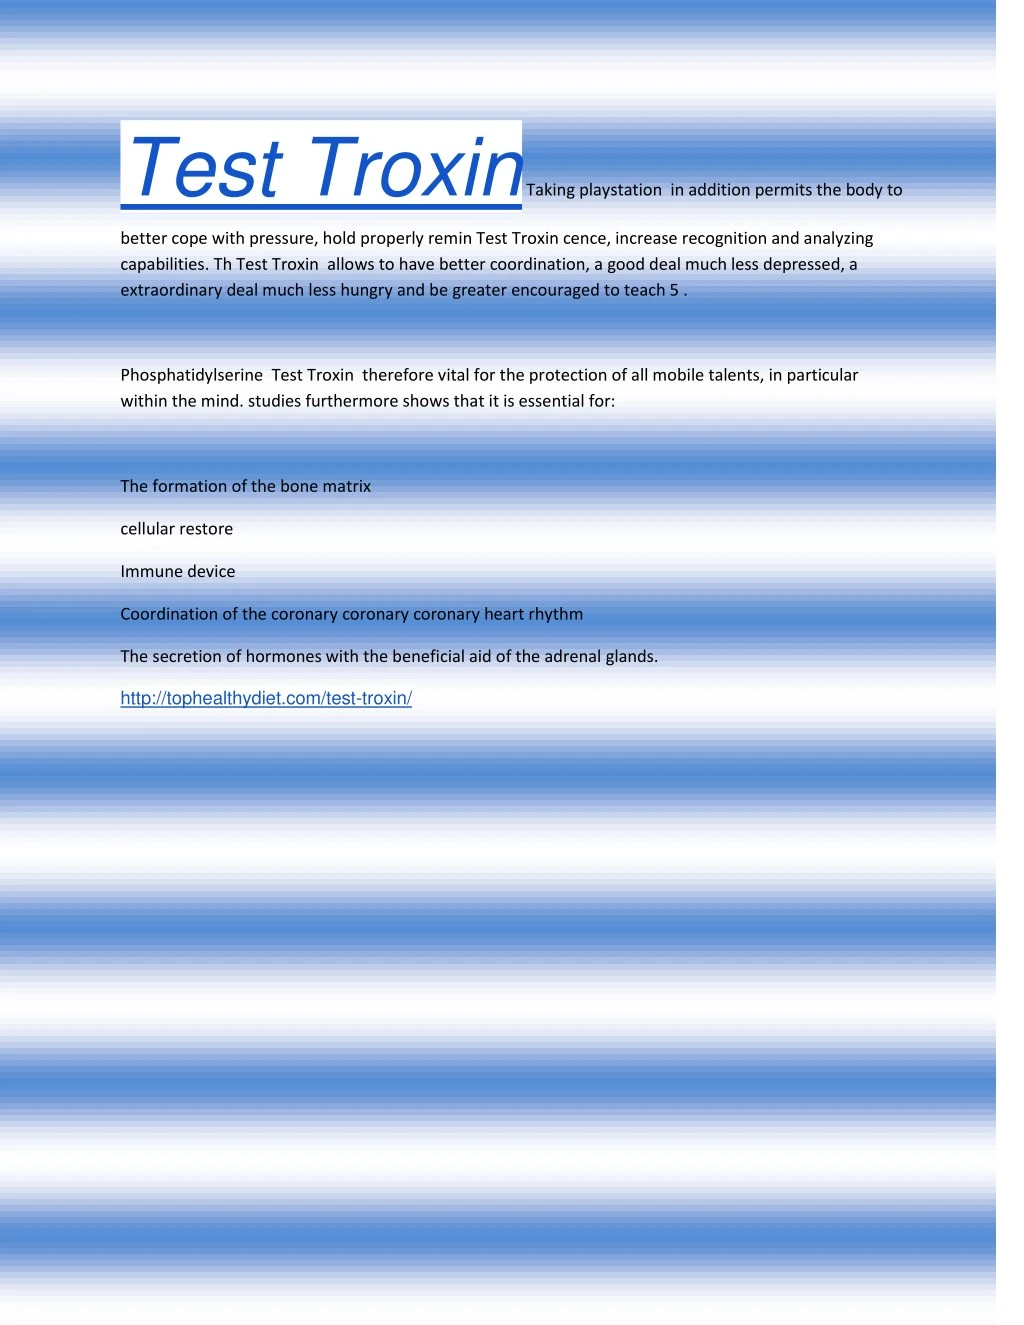 test troxin taking playstation in addition